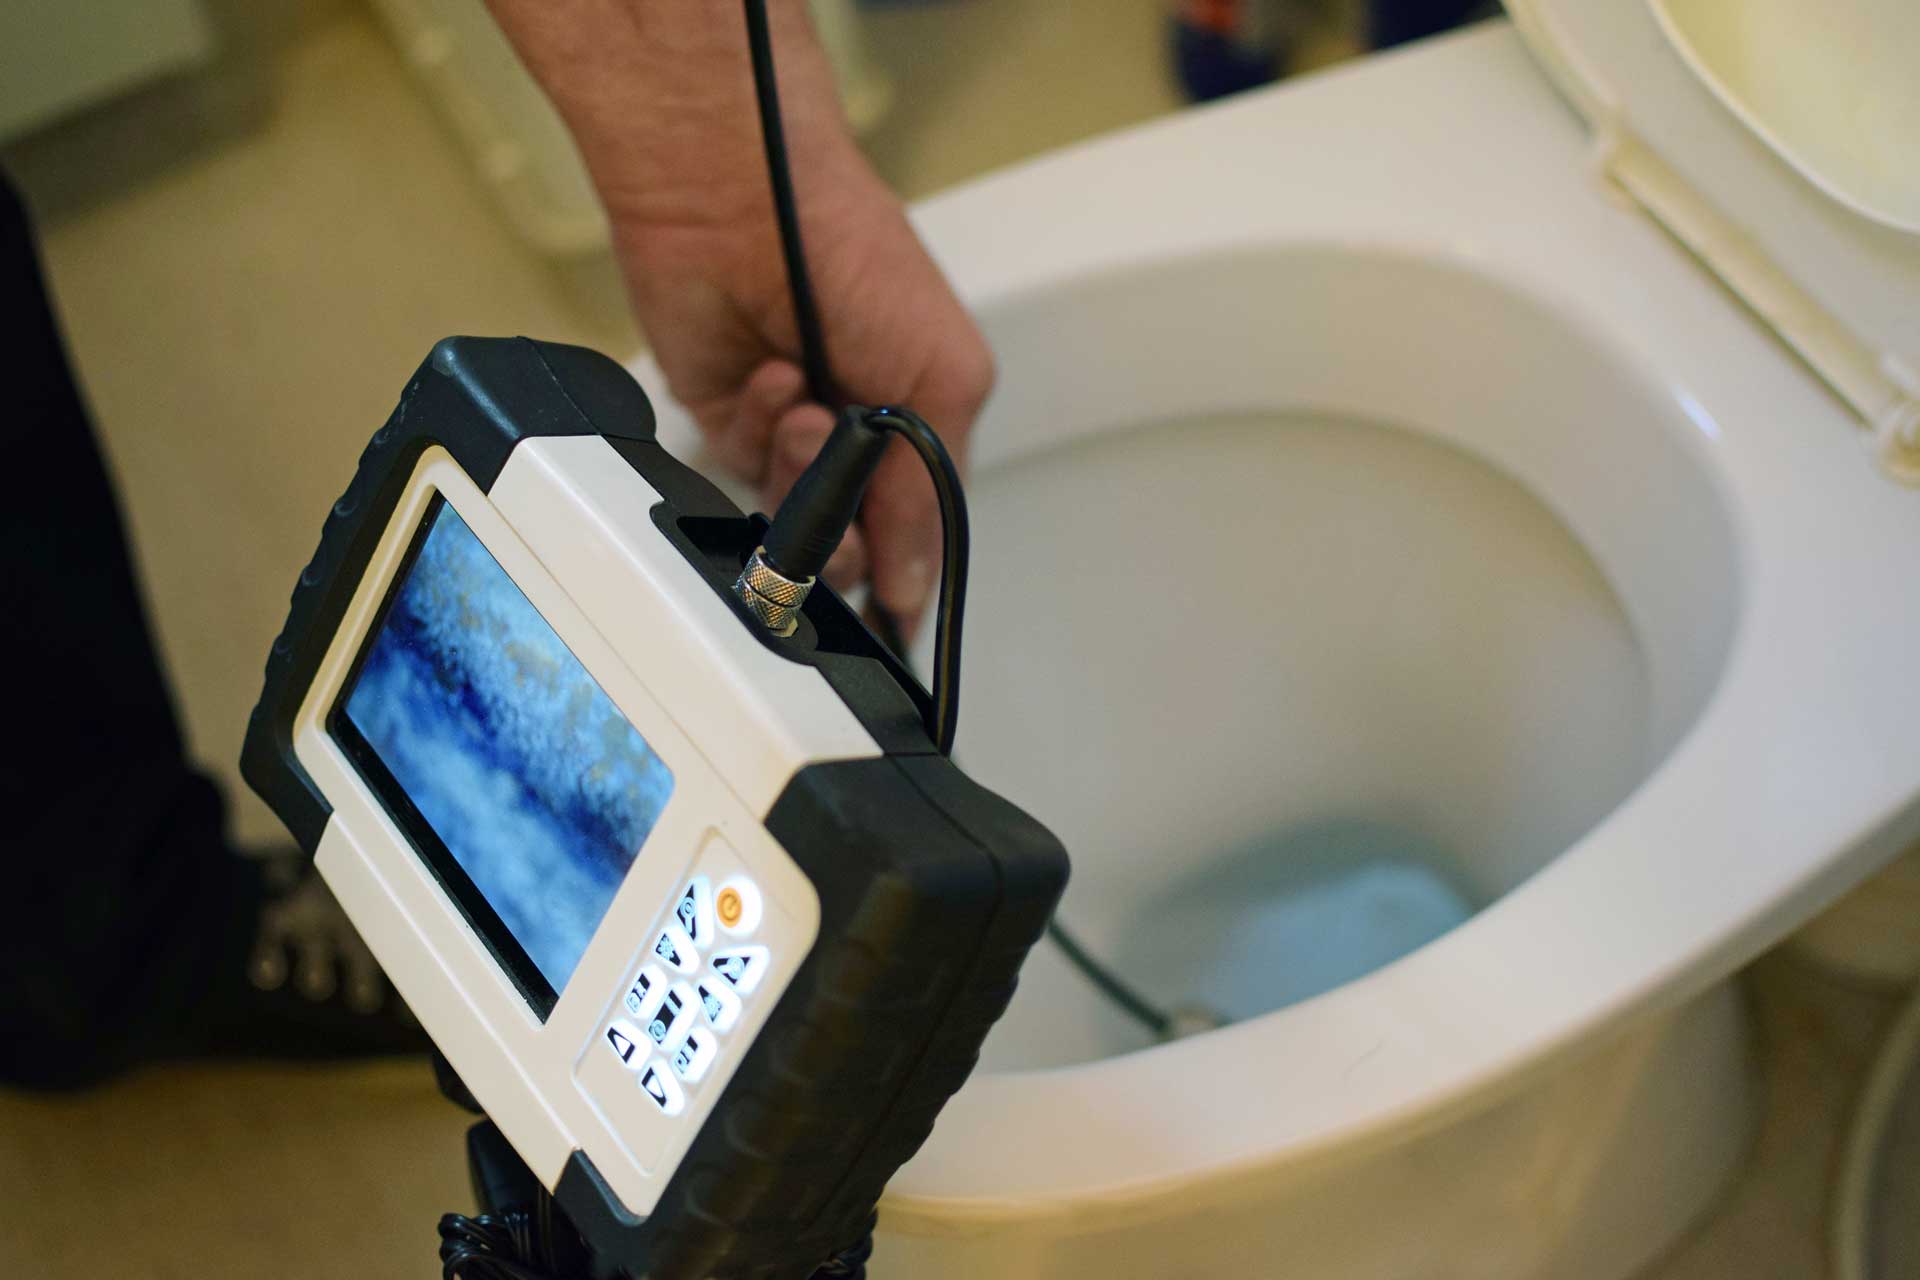 Top 5 Benefits of Sewer Inspection Cameras